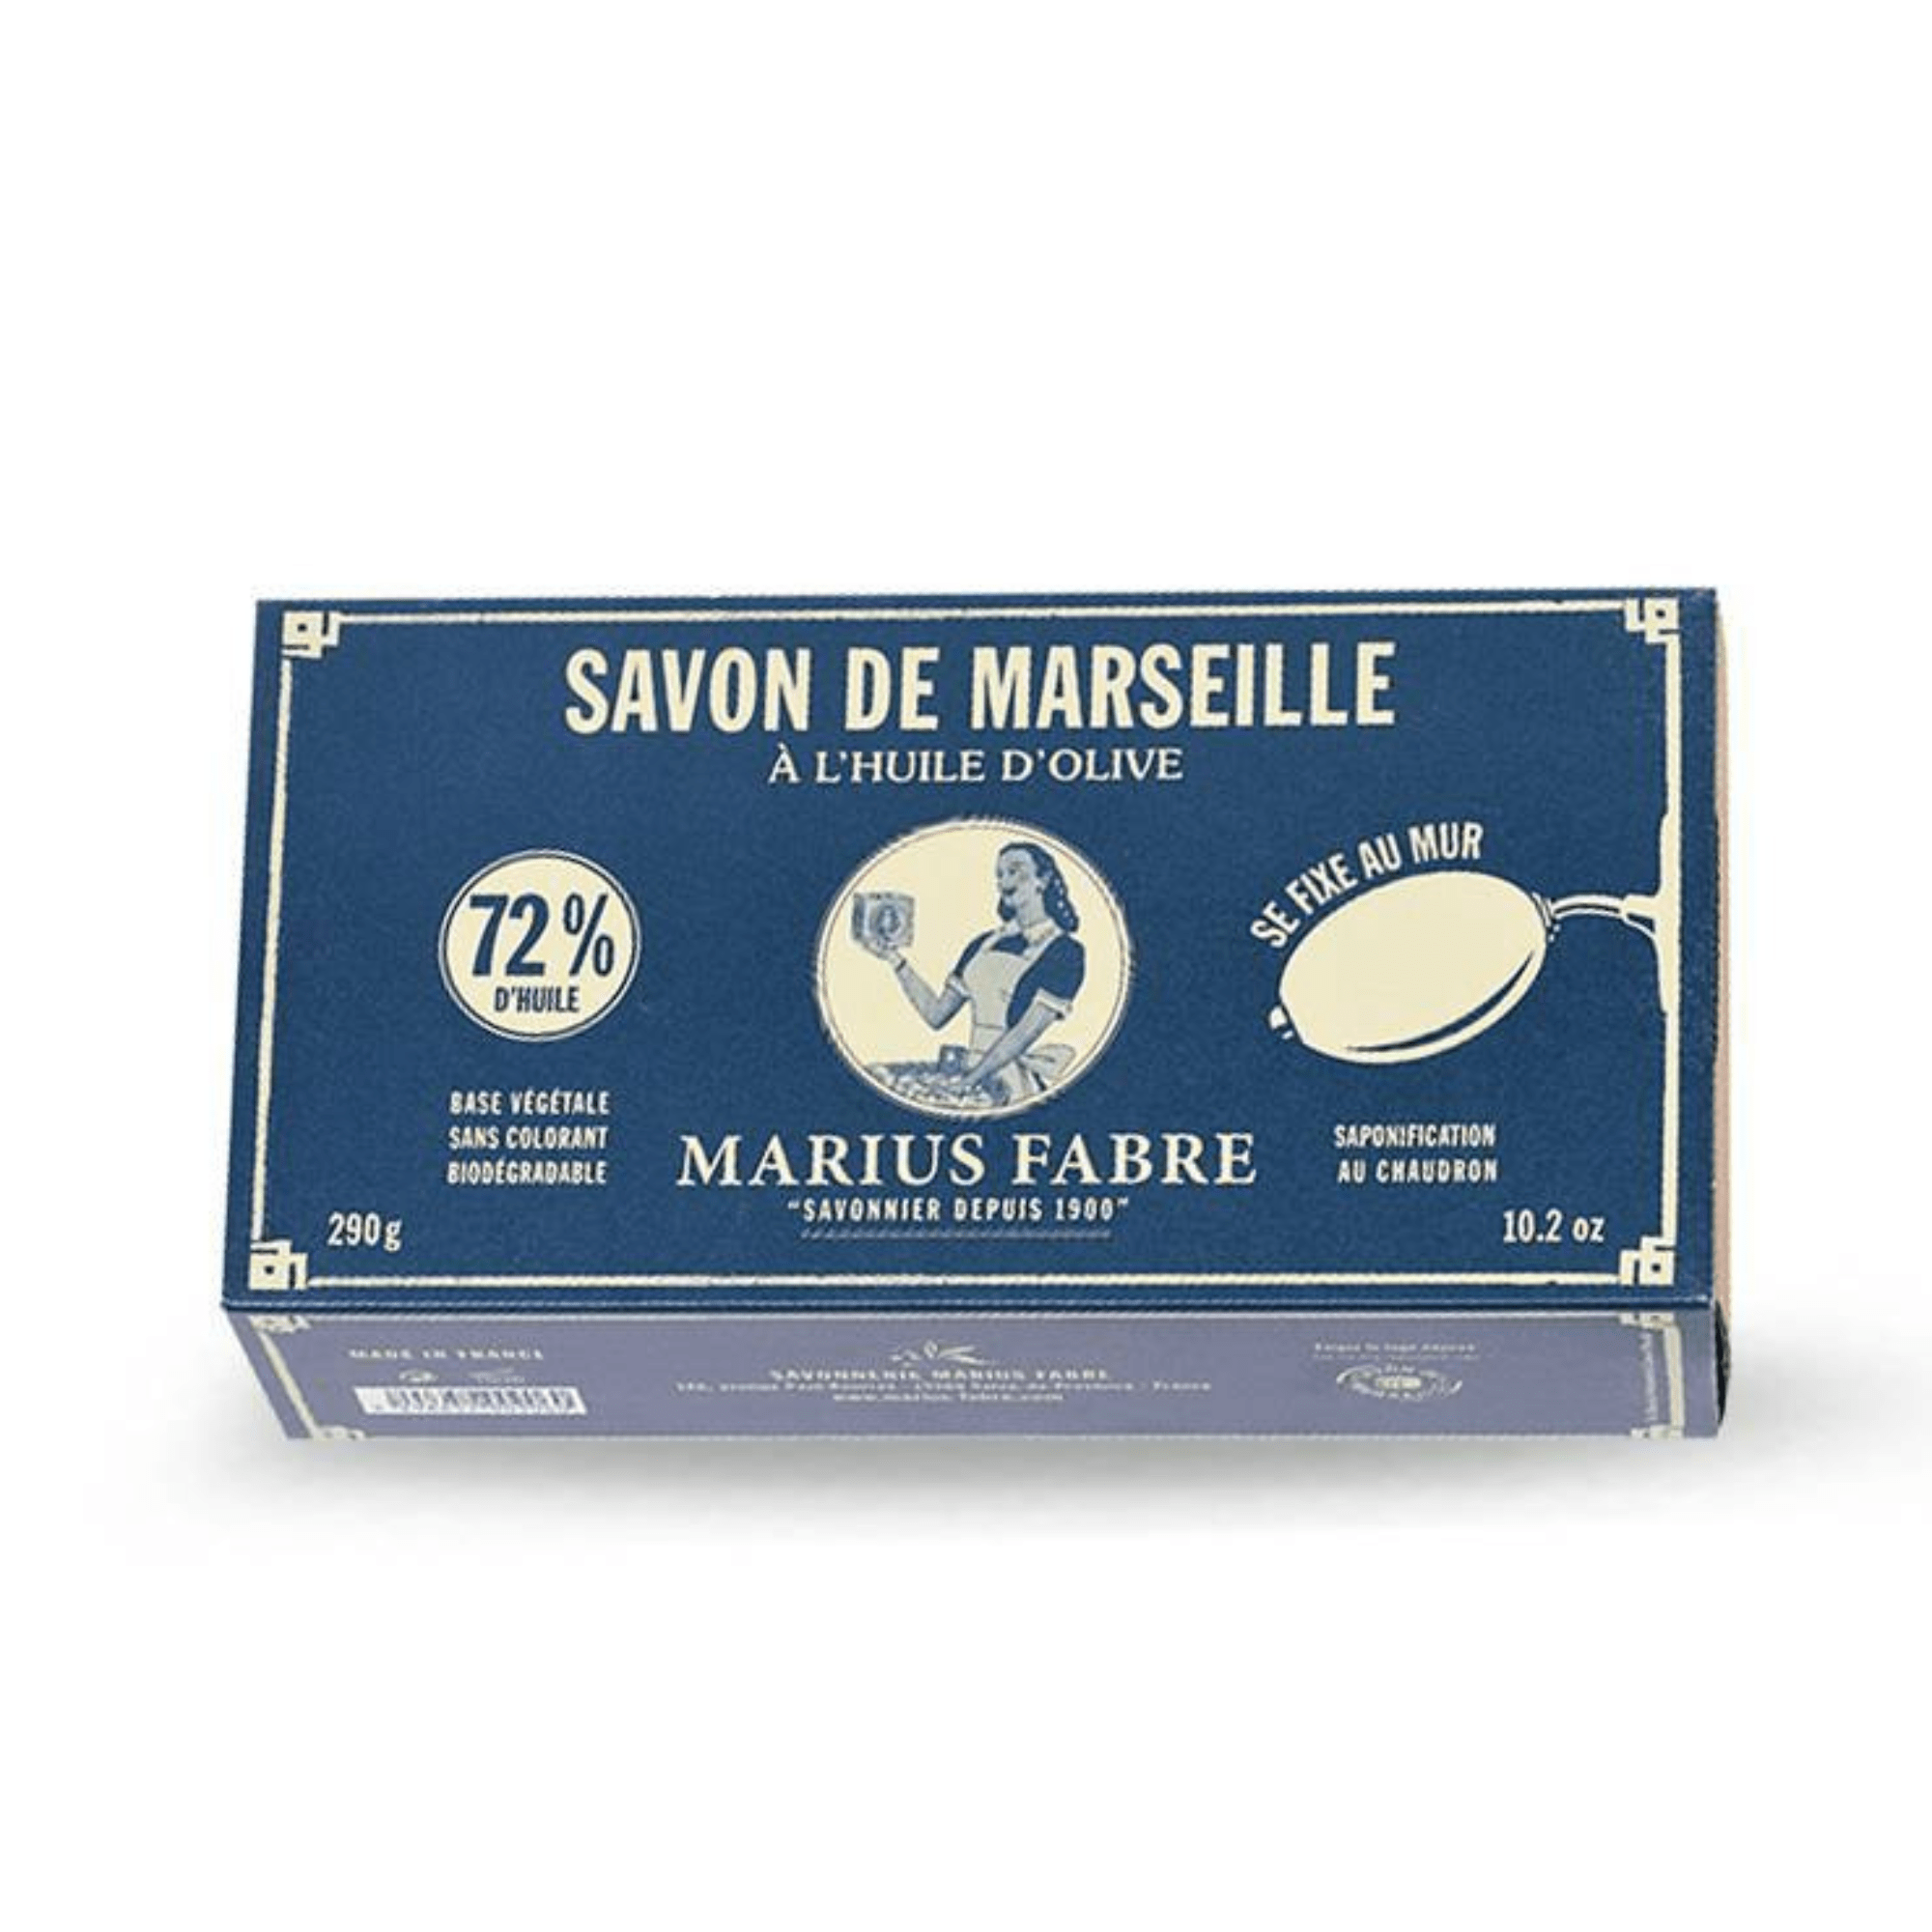 Marius Fabre Olive Oil Marseille Soap to be Fixed to the Wall - Brass Holder and Soap (290 g) #10086601 photo